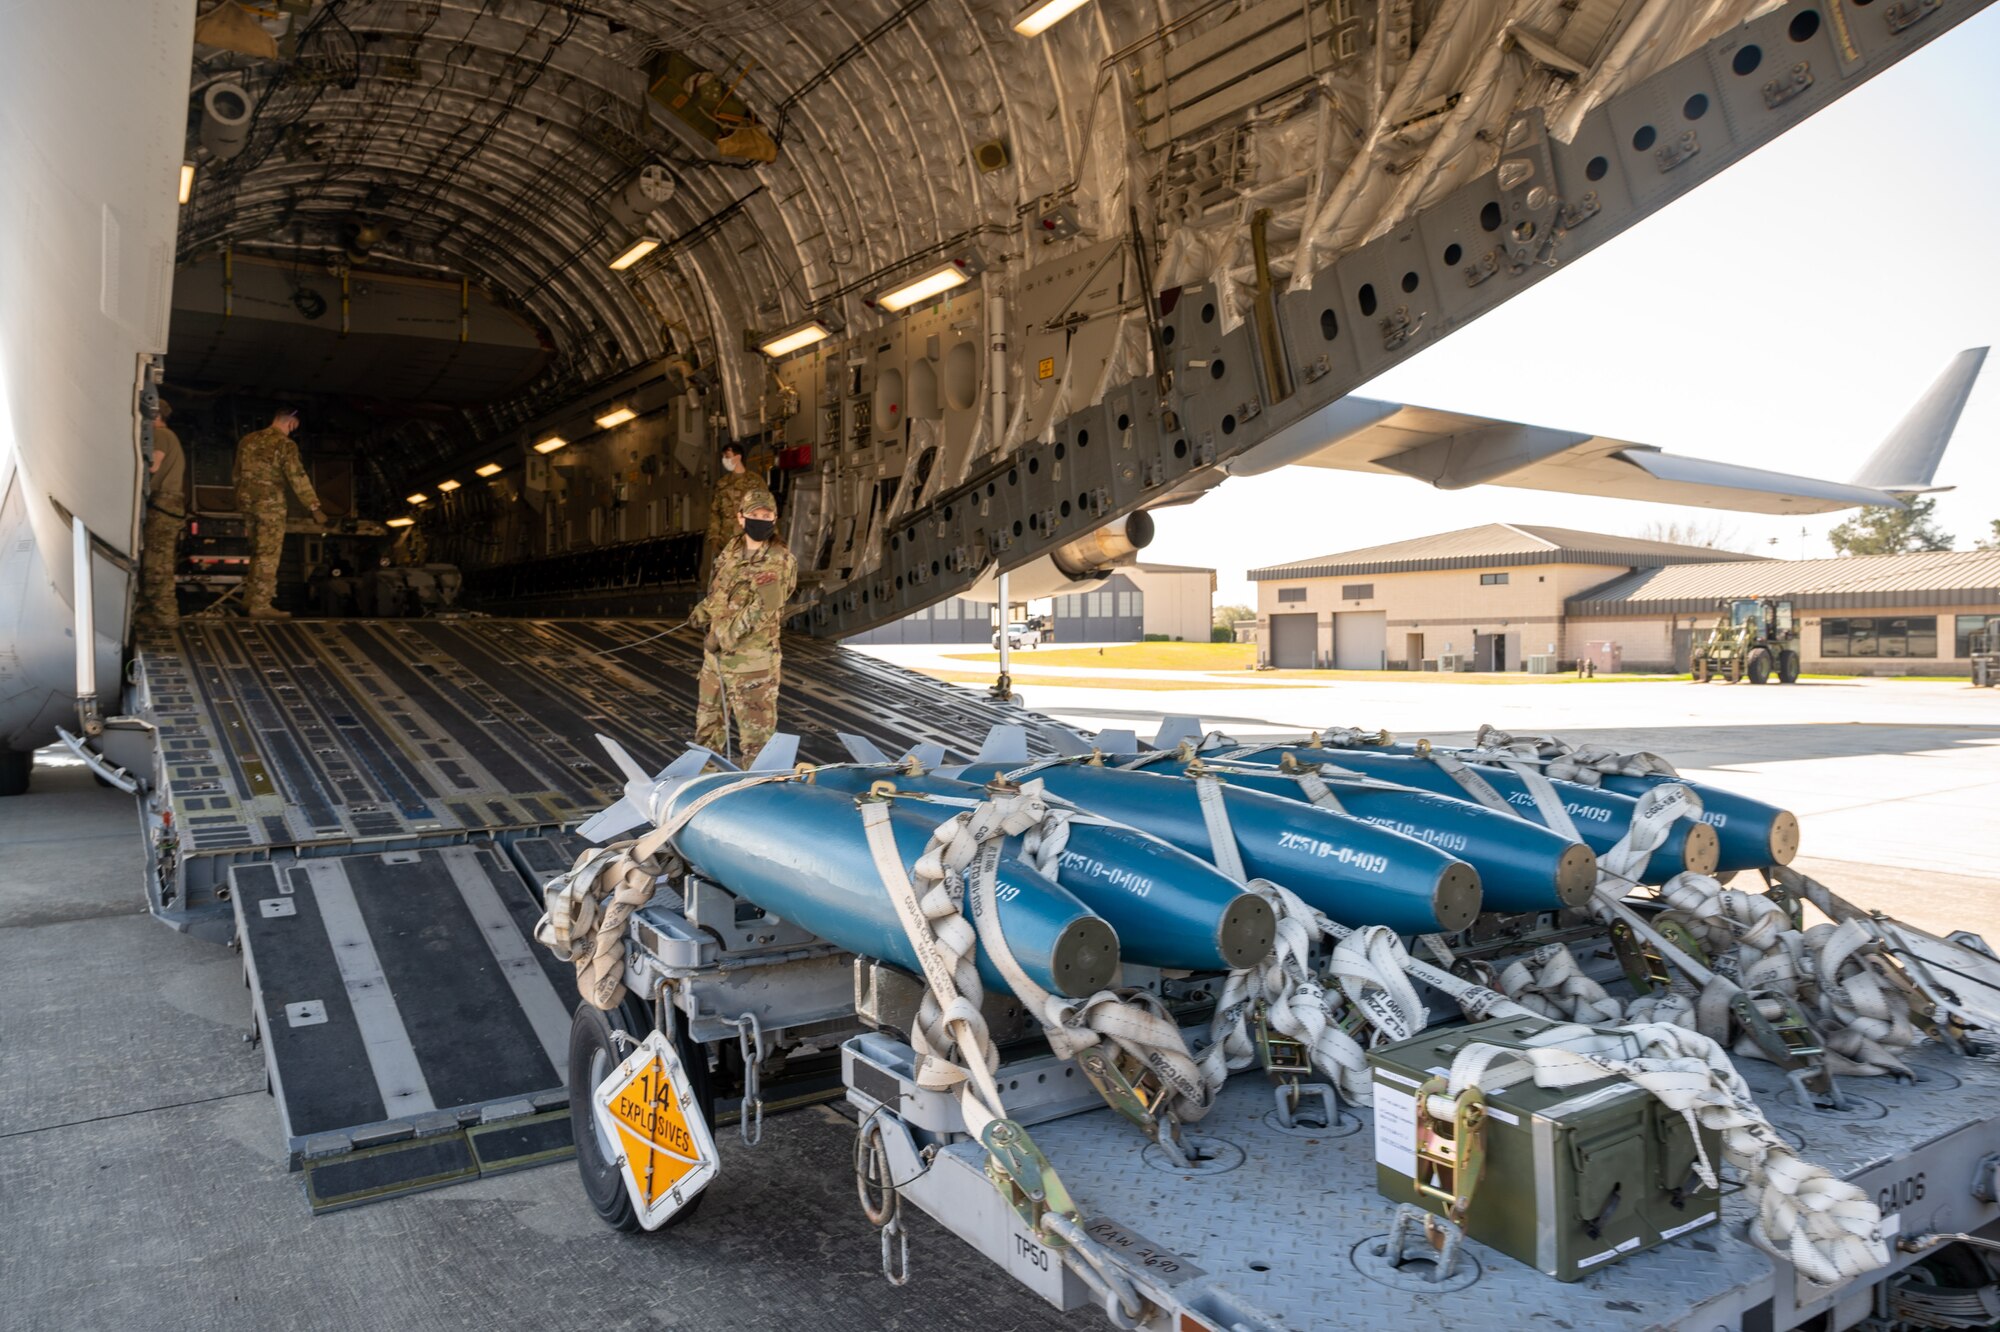 Inert training bombs are being loaded onto a Dover Air Force Base C-17 Globemaster III during exercise Mosaic Tiger at Moody AFB, Georgia, Feb. 25, 2021. Multi-capable mobility Airmen participated in the exercise led by the 23rd Wing at Moody AFB, Georgia, to enhance readiness and reinforce Air Mobility Command support to the joint warfighter. (U.S. Air Force photo by Airman 1st Class Faith Schaefer)